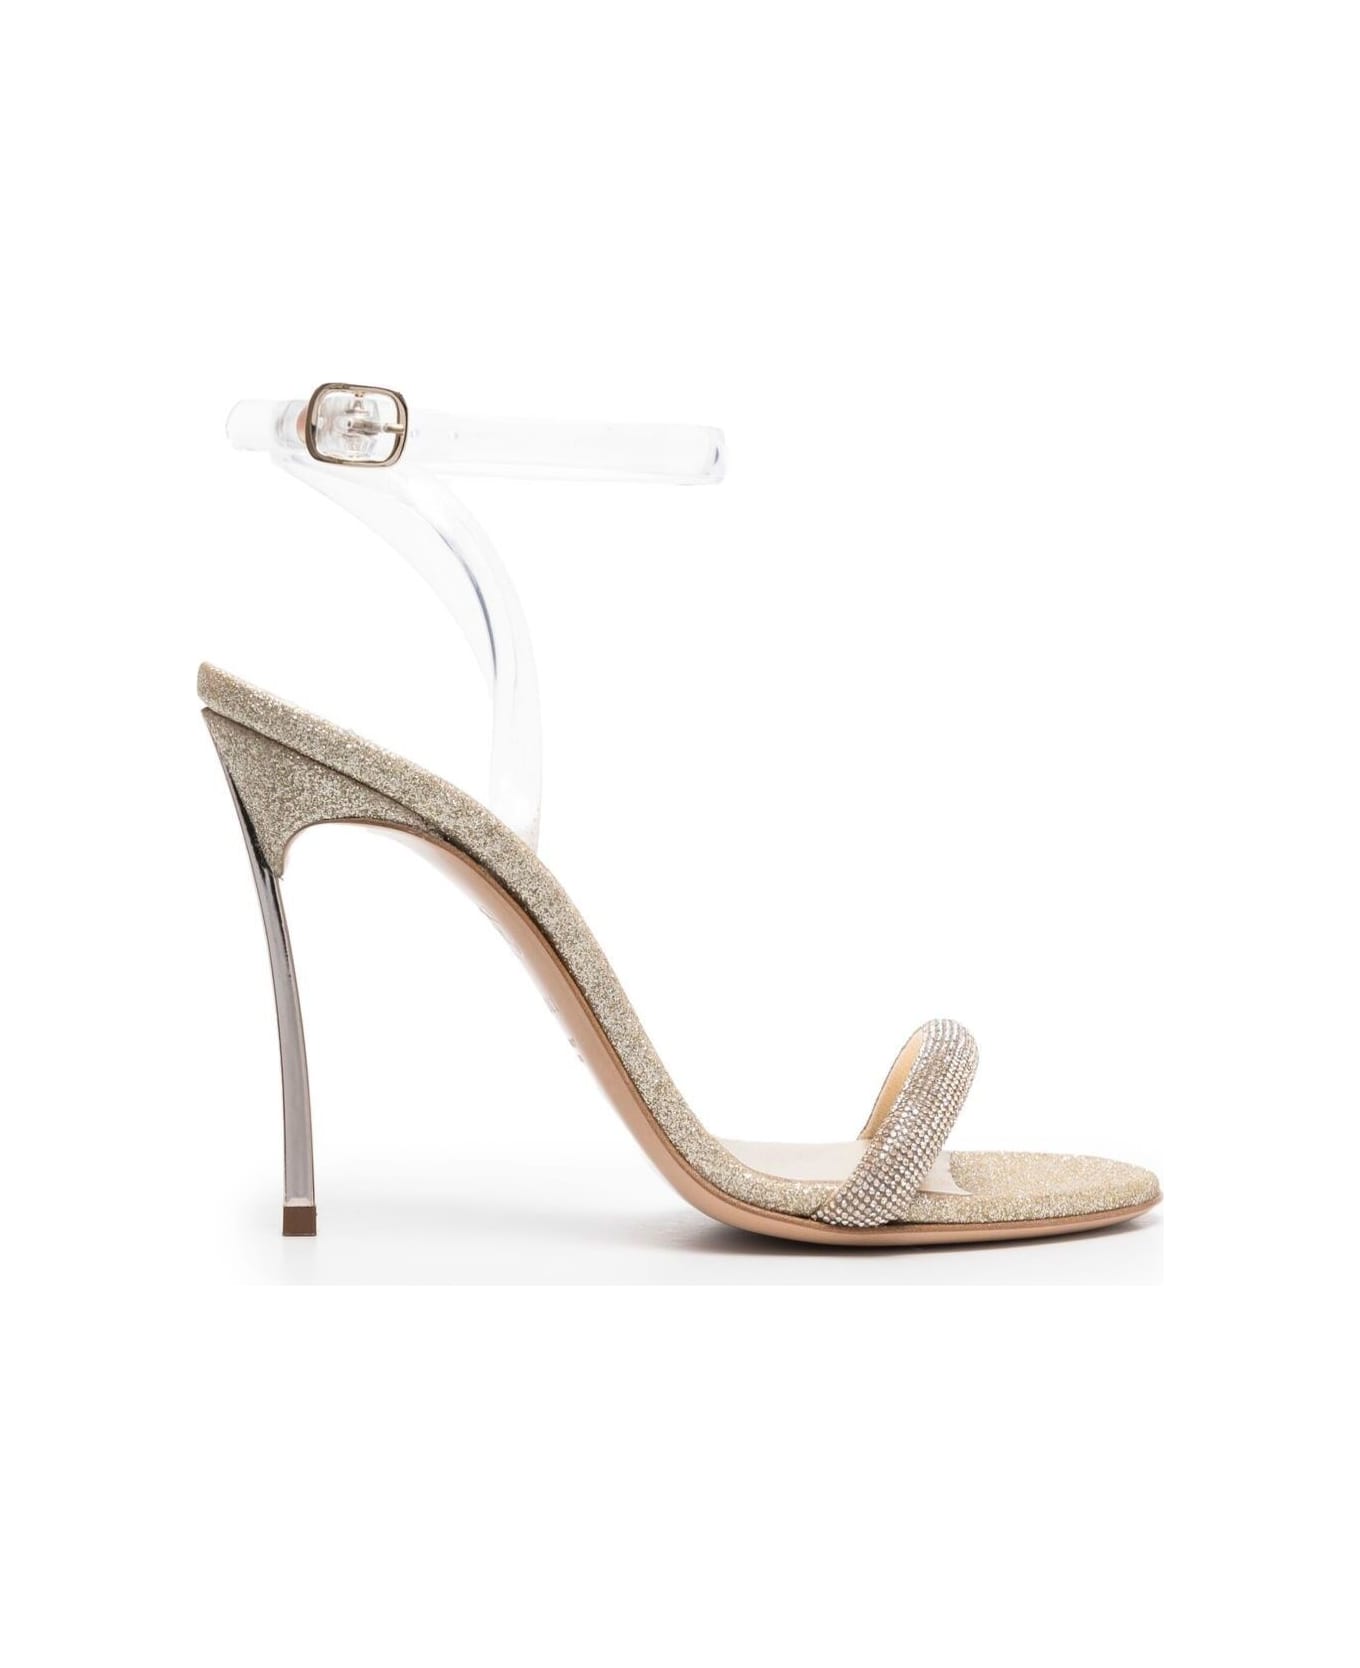 Casadei Gold-tone Glitteres Sandals With Stiletto Heel In Leather Woman - Honey Goldust サンダル